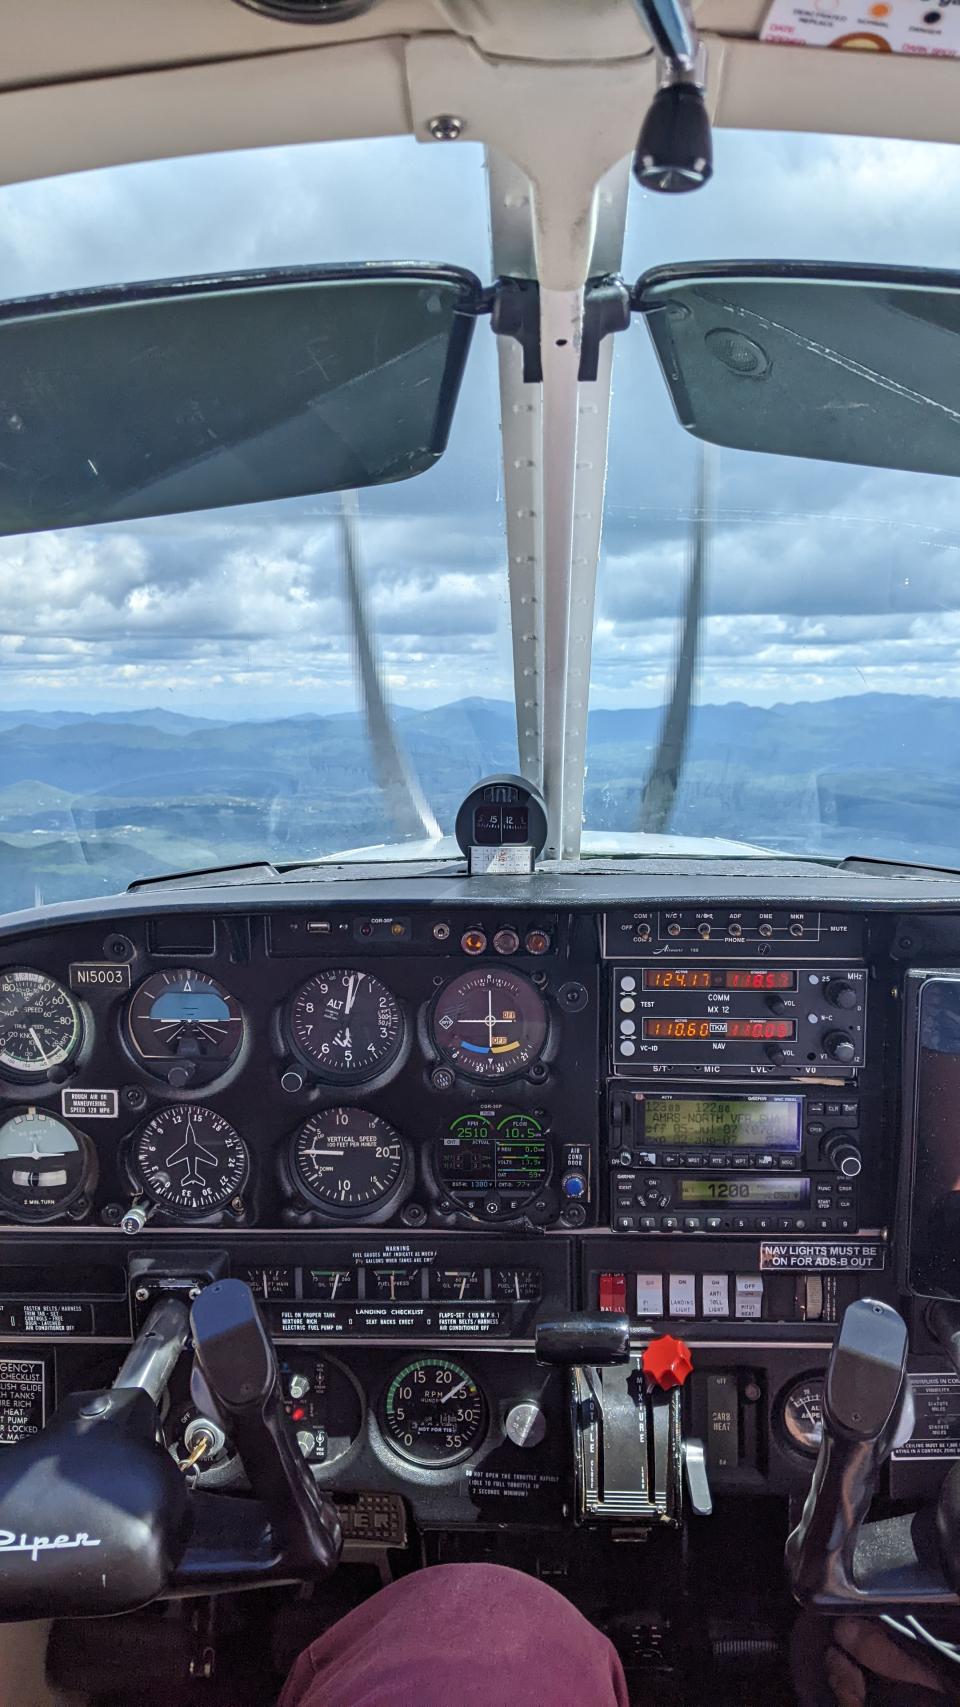 The view of airplane controls from the pilot's seat, with mountains beyond.